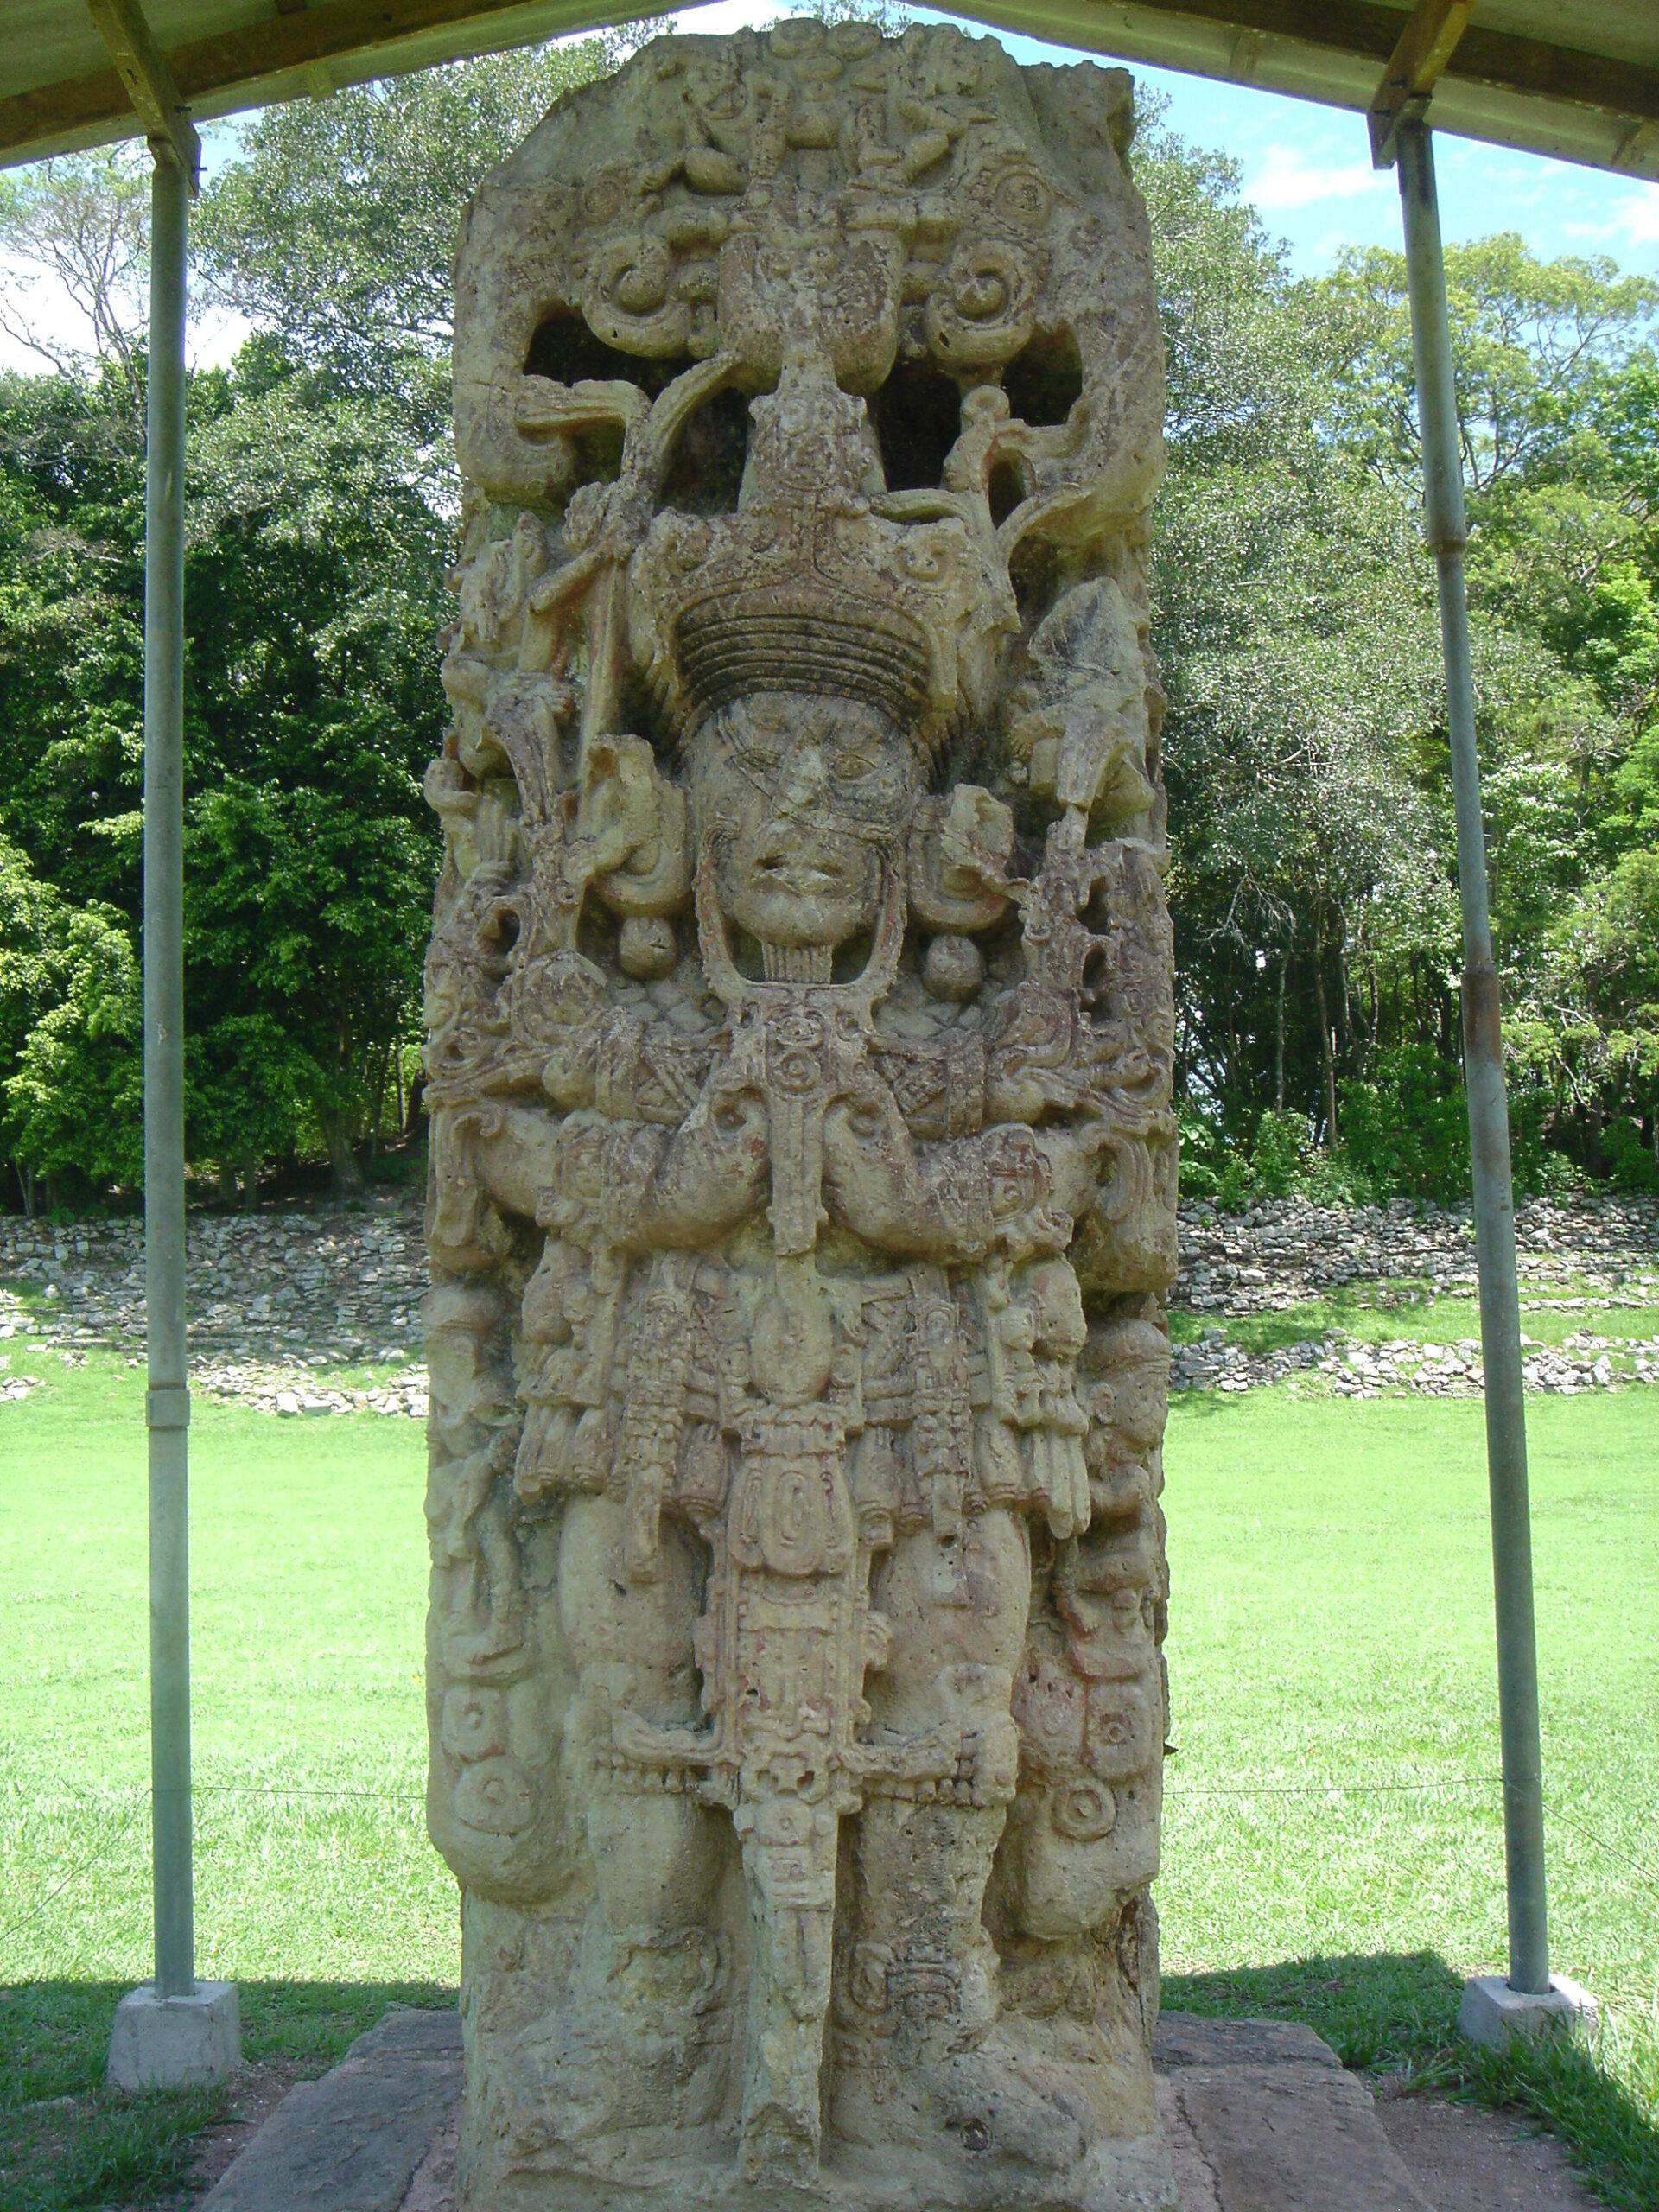 A stele depicting 18 Rabbit, one of anicent rulers of the Mayan city of Copï¿½n.